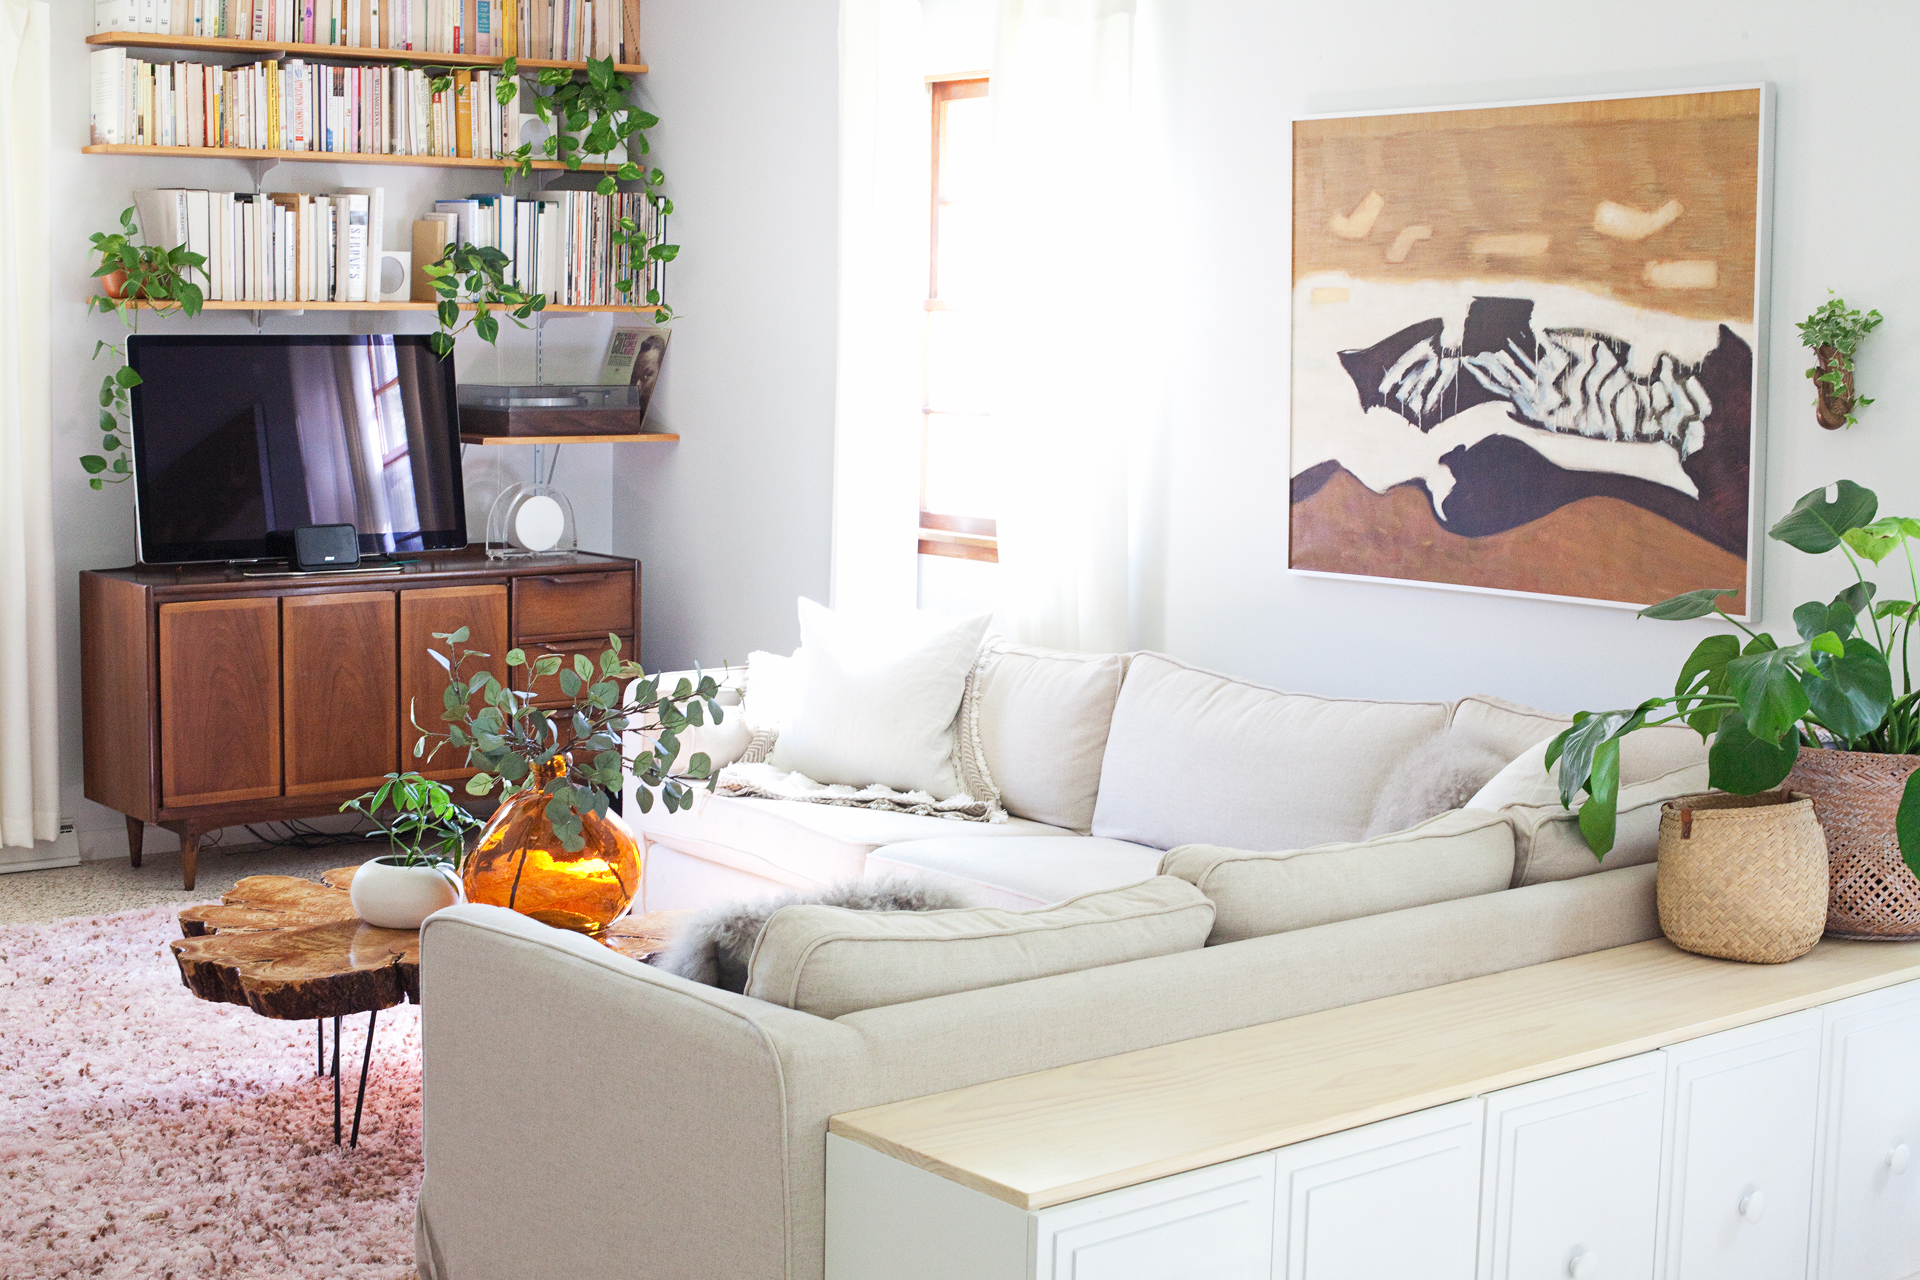 Easy Tips for Redecorating a Room